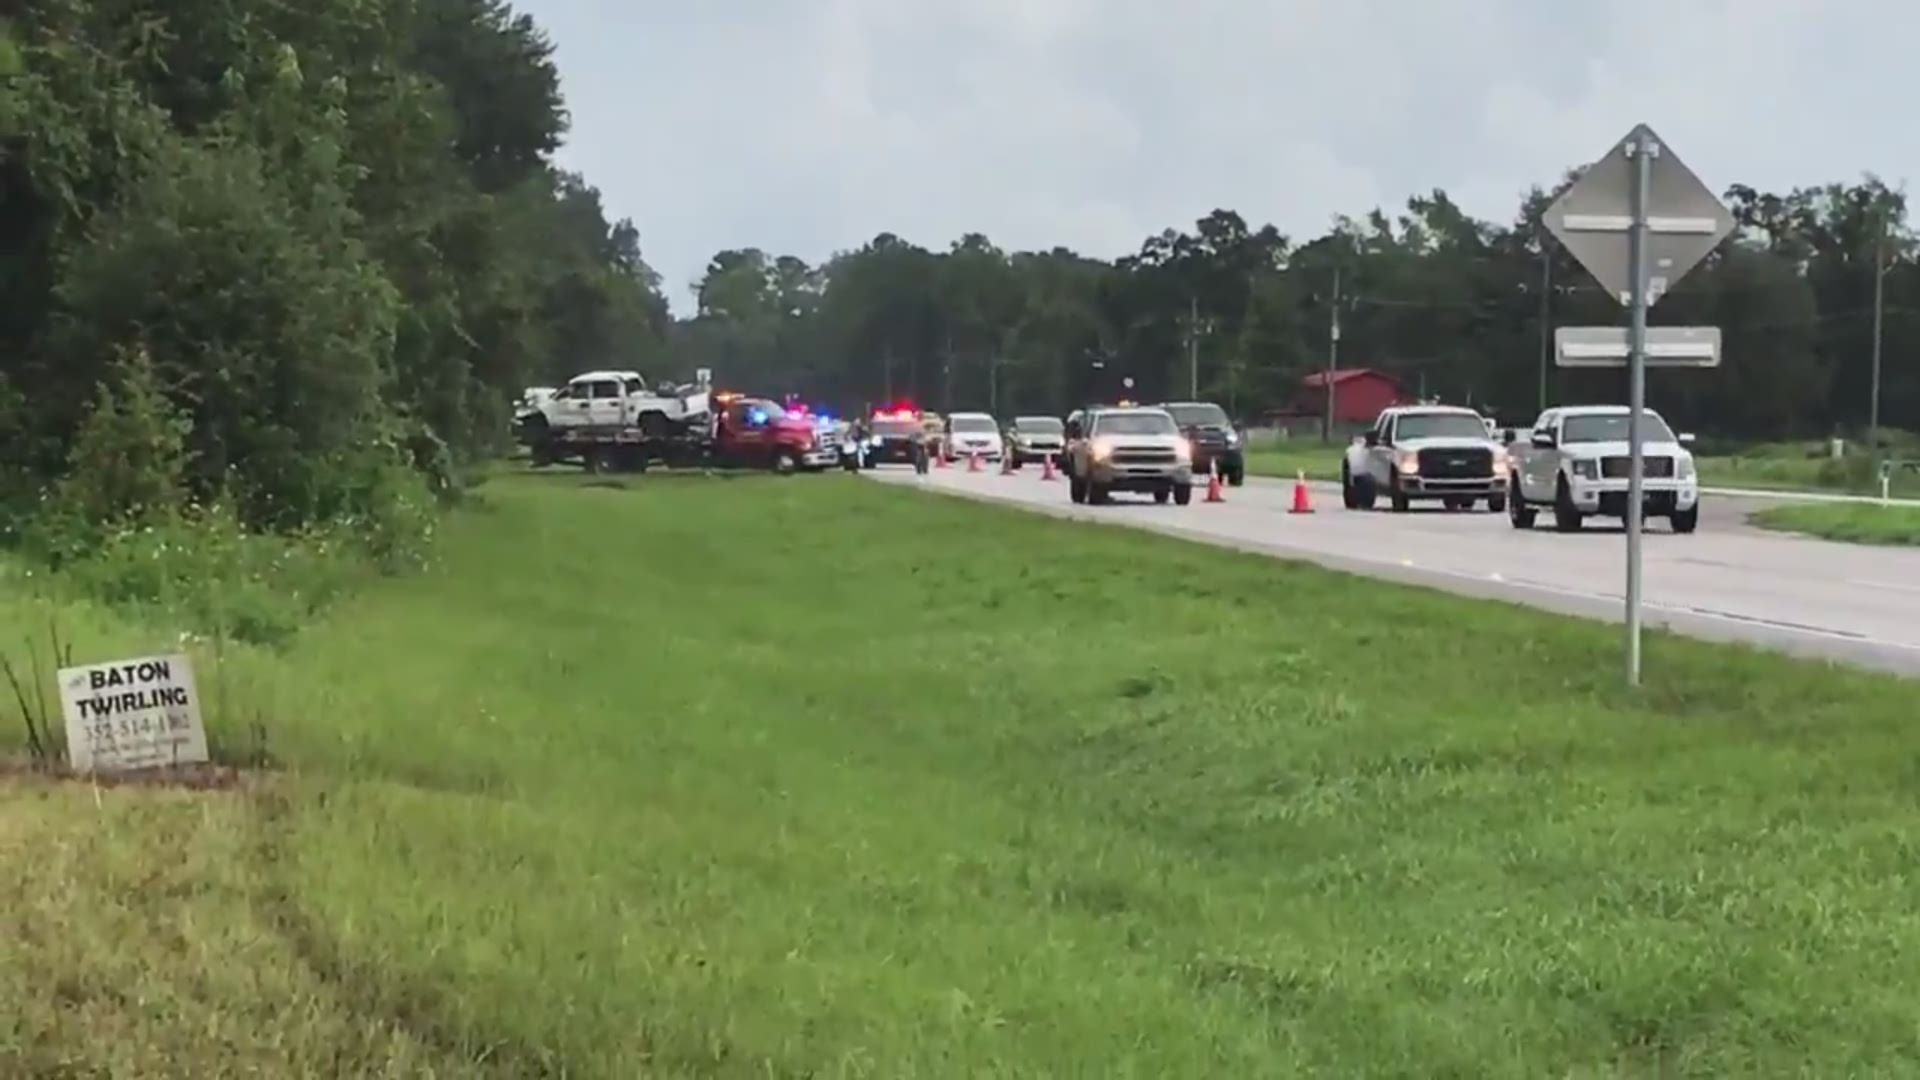 Video from the scene of a deadly crash in Bradford County Monday morning.